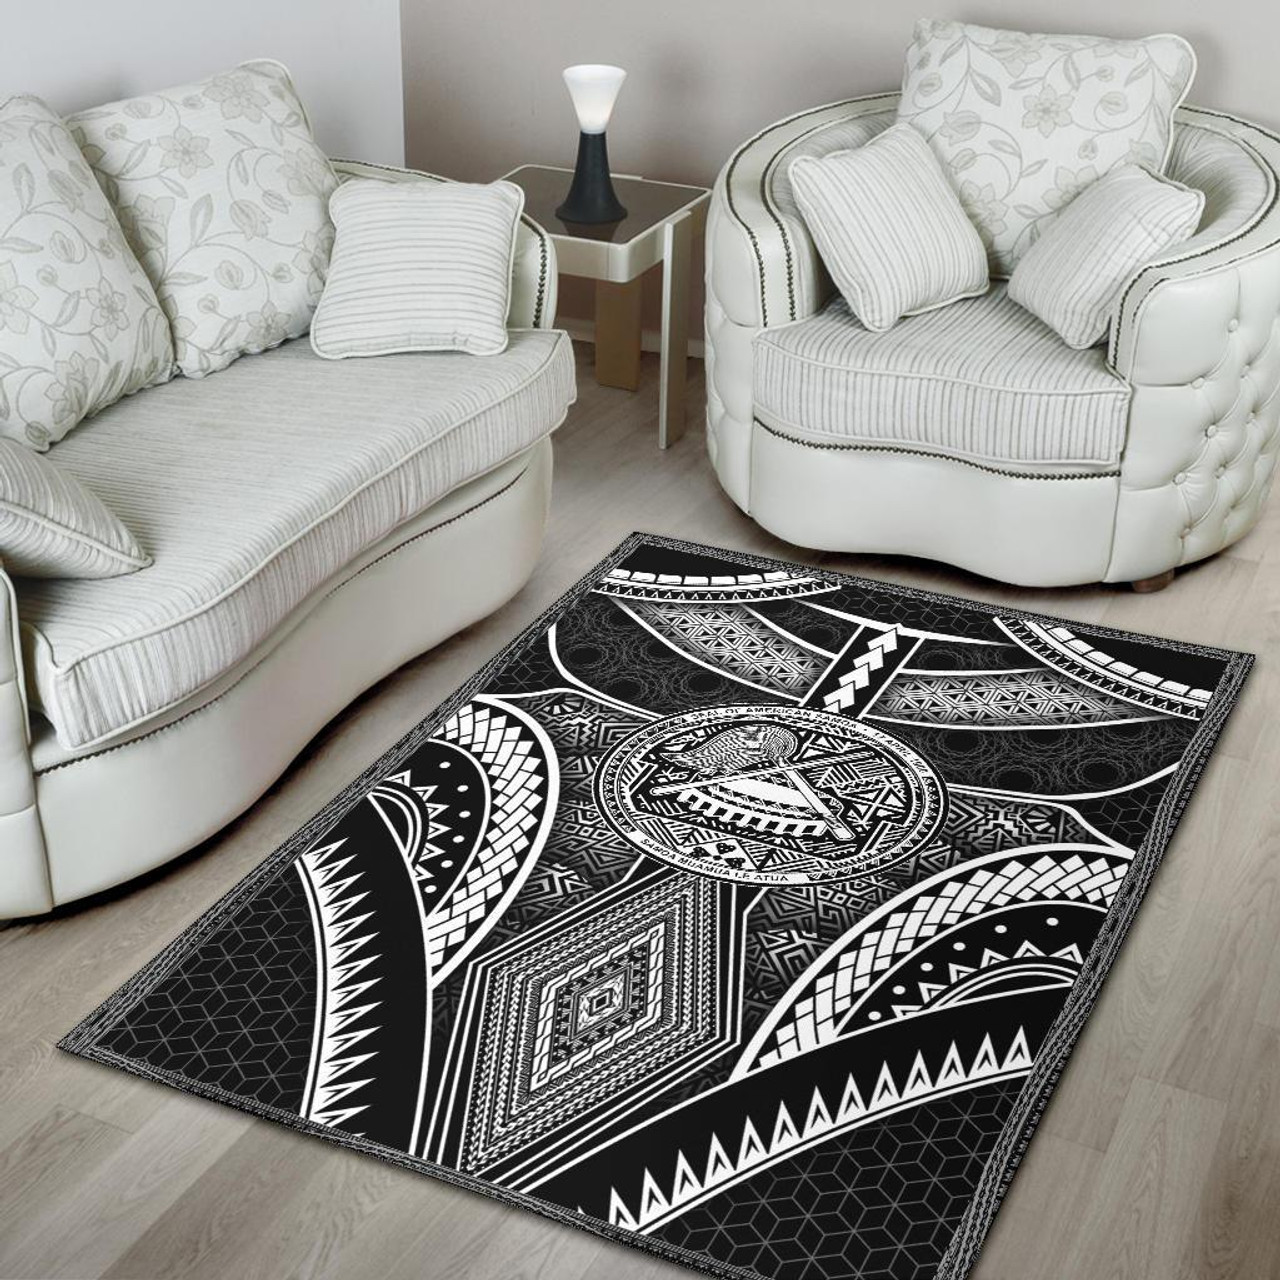 Polynesian Rugs - American Samoa Coat Of Arm With Poly Patterns Polynesian 4